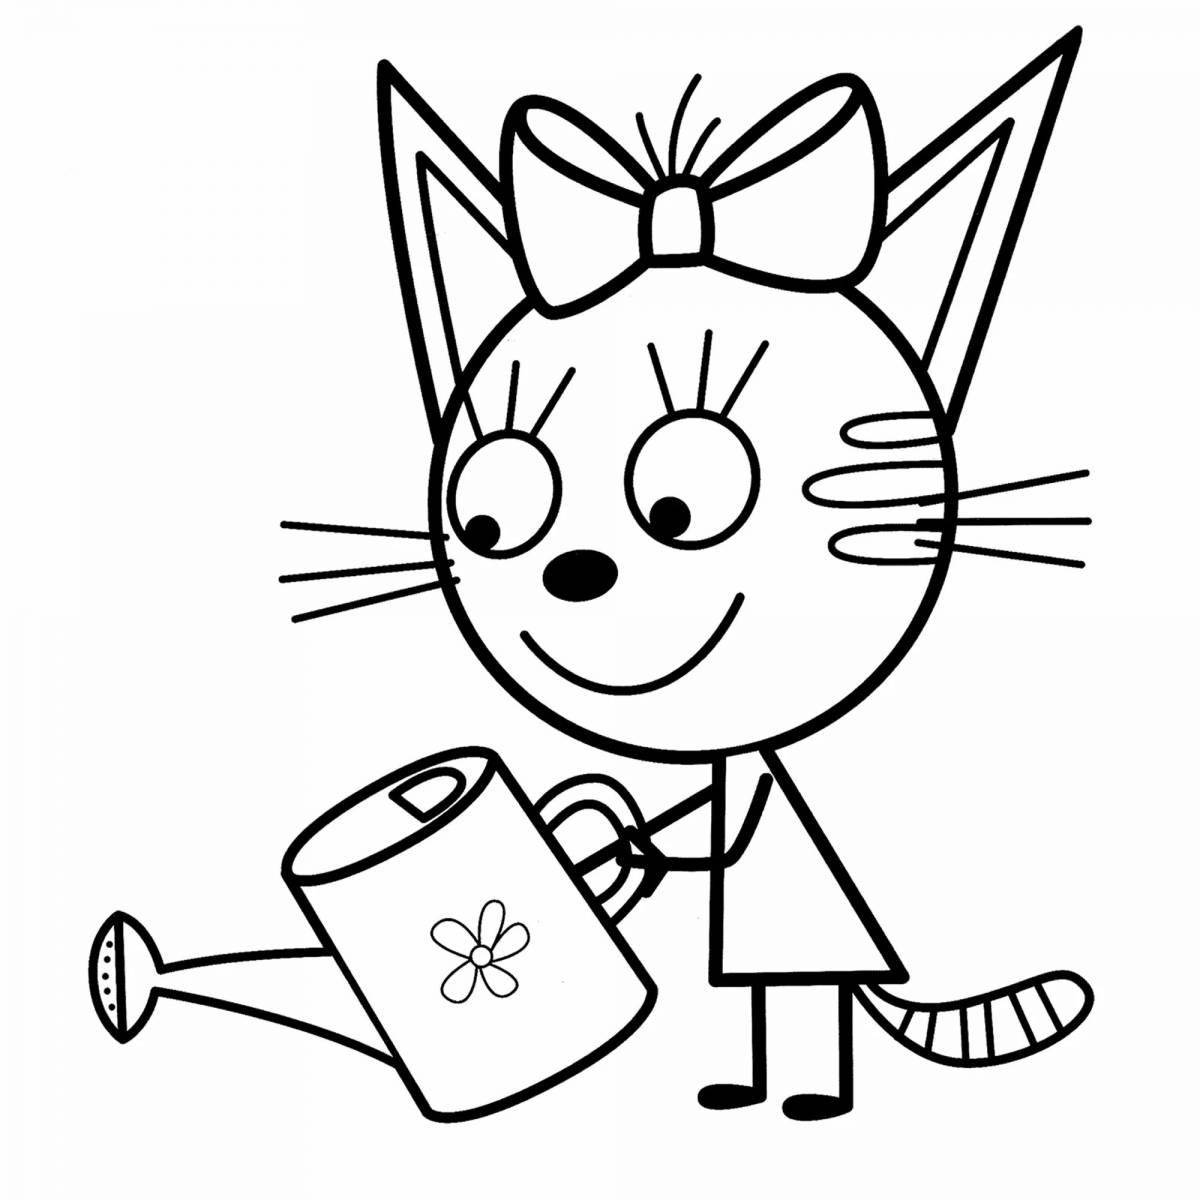 Radiant 3 cats coloring page for kids